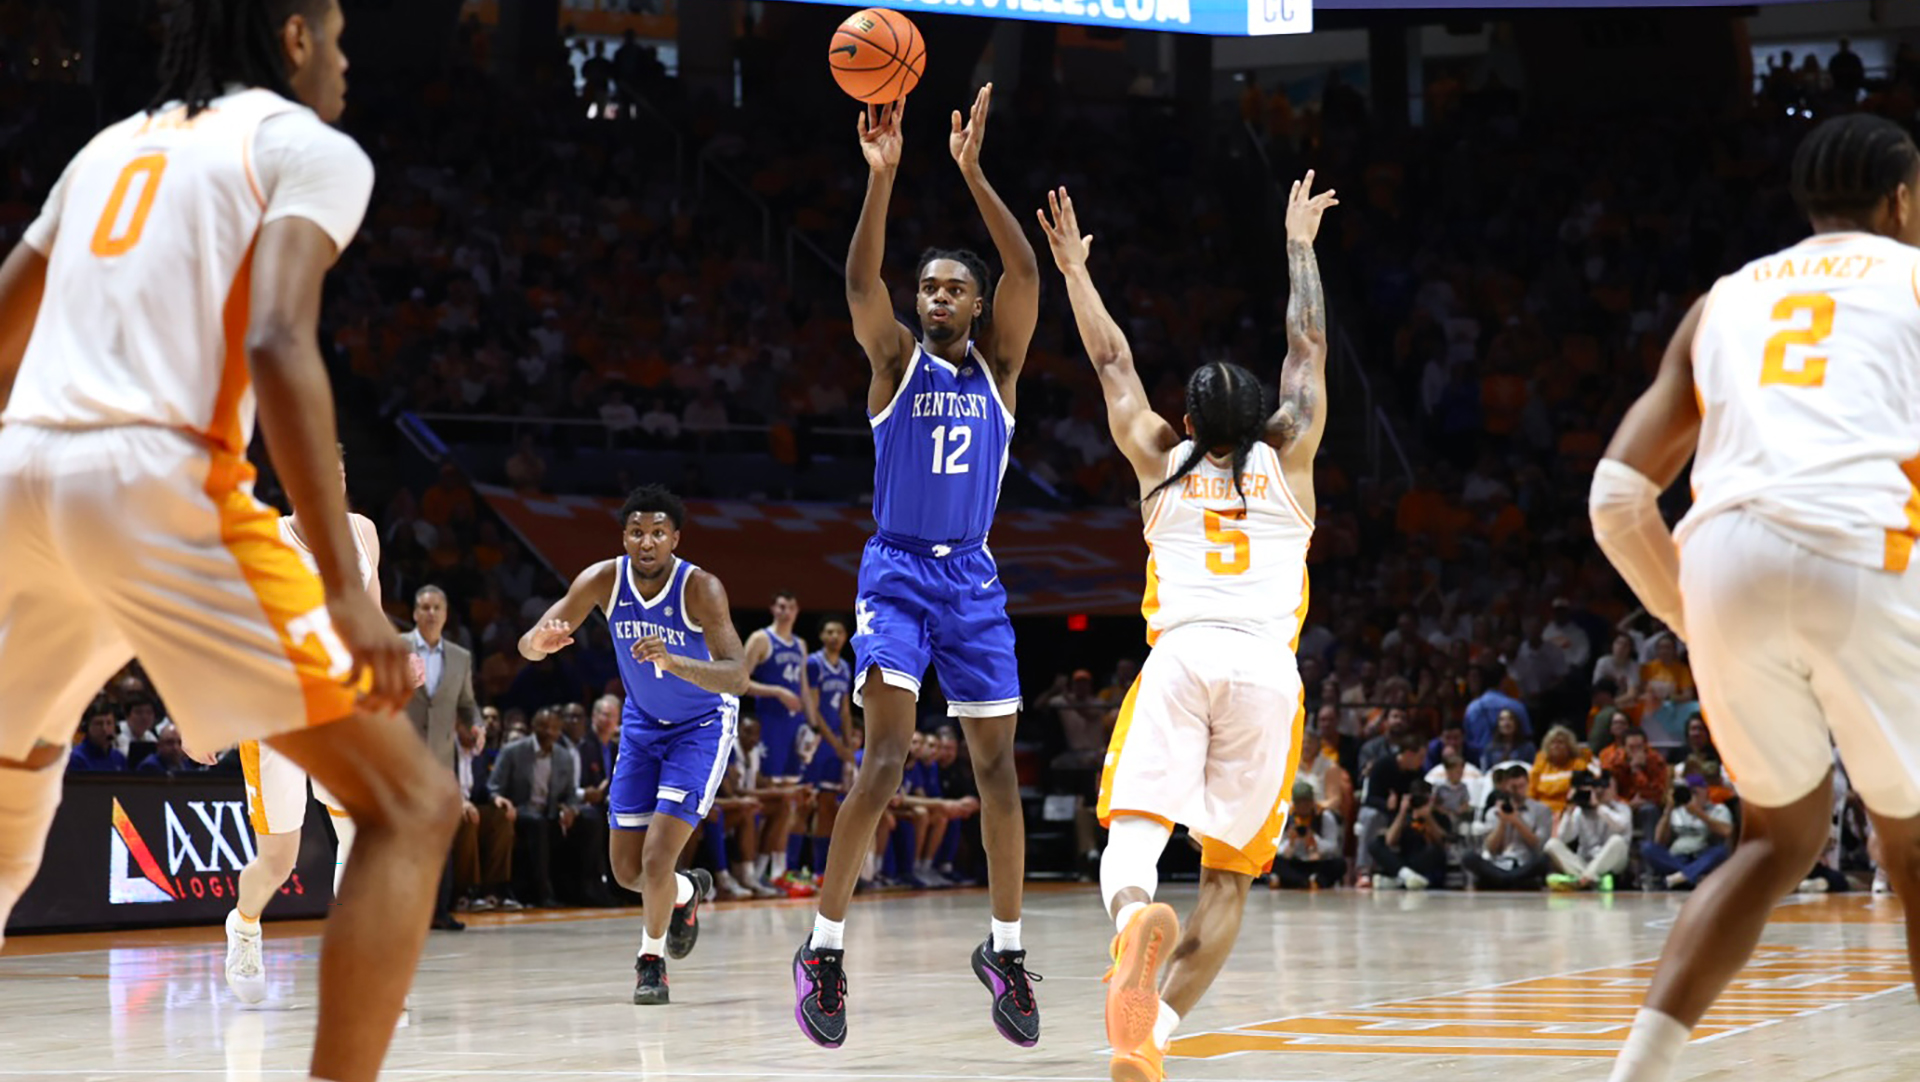 Reeves, Sheppard Lead No. 15 Kentucky Past No. 4 Tennessee